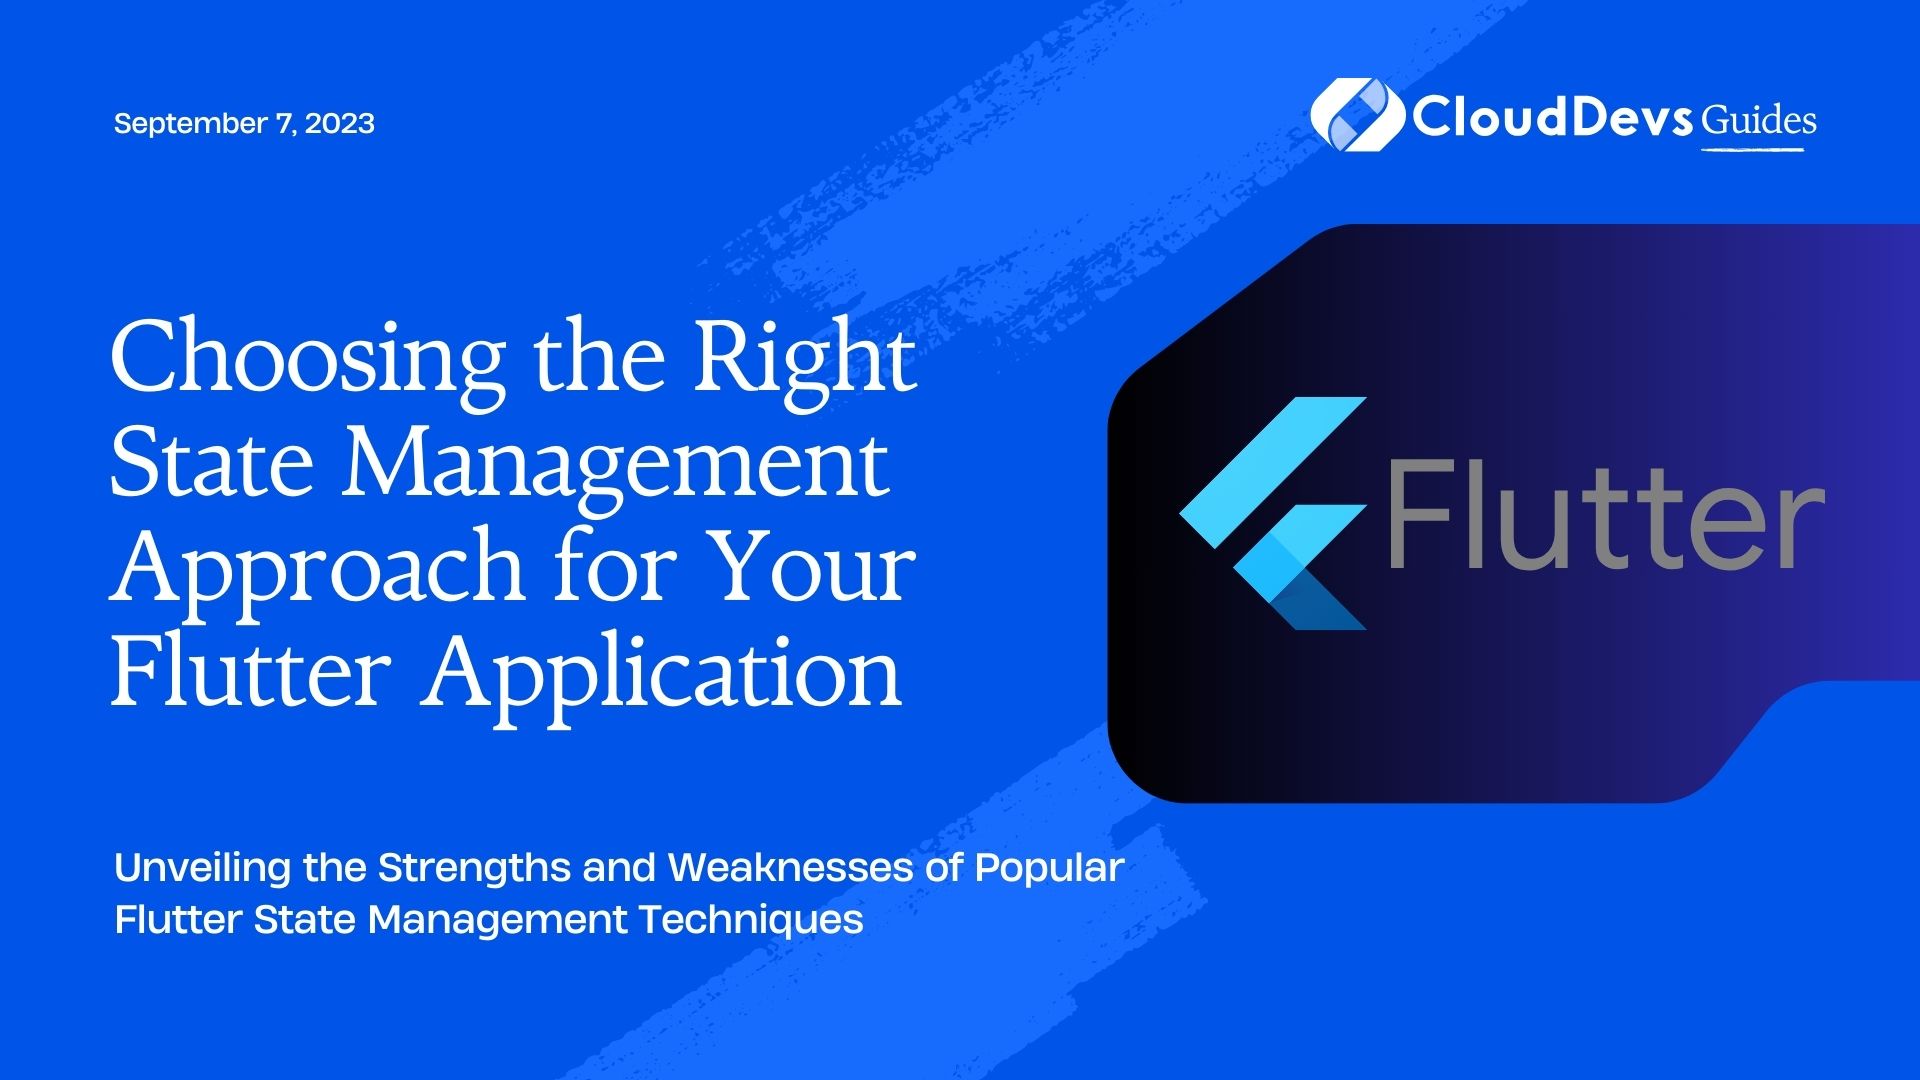 Choosing the Right State Management Approach for Your Flutter Application